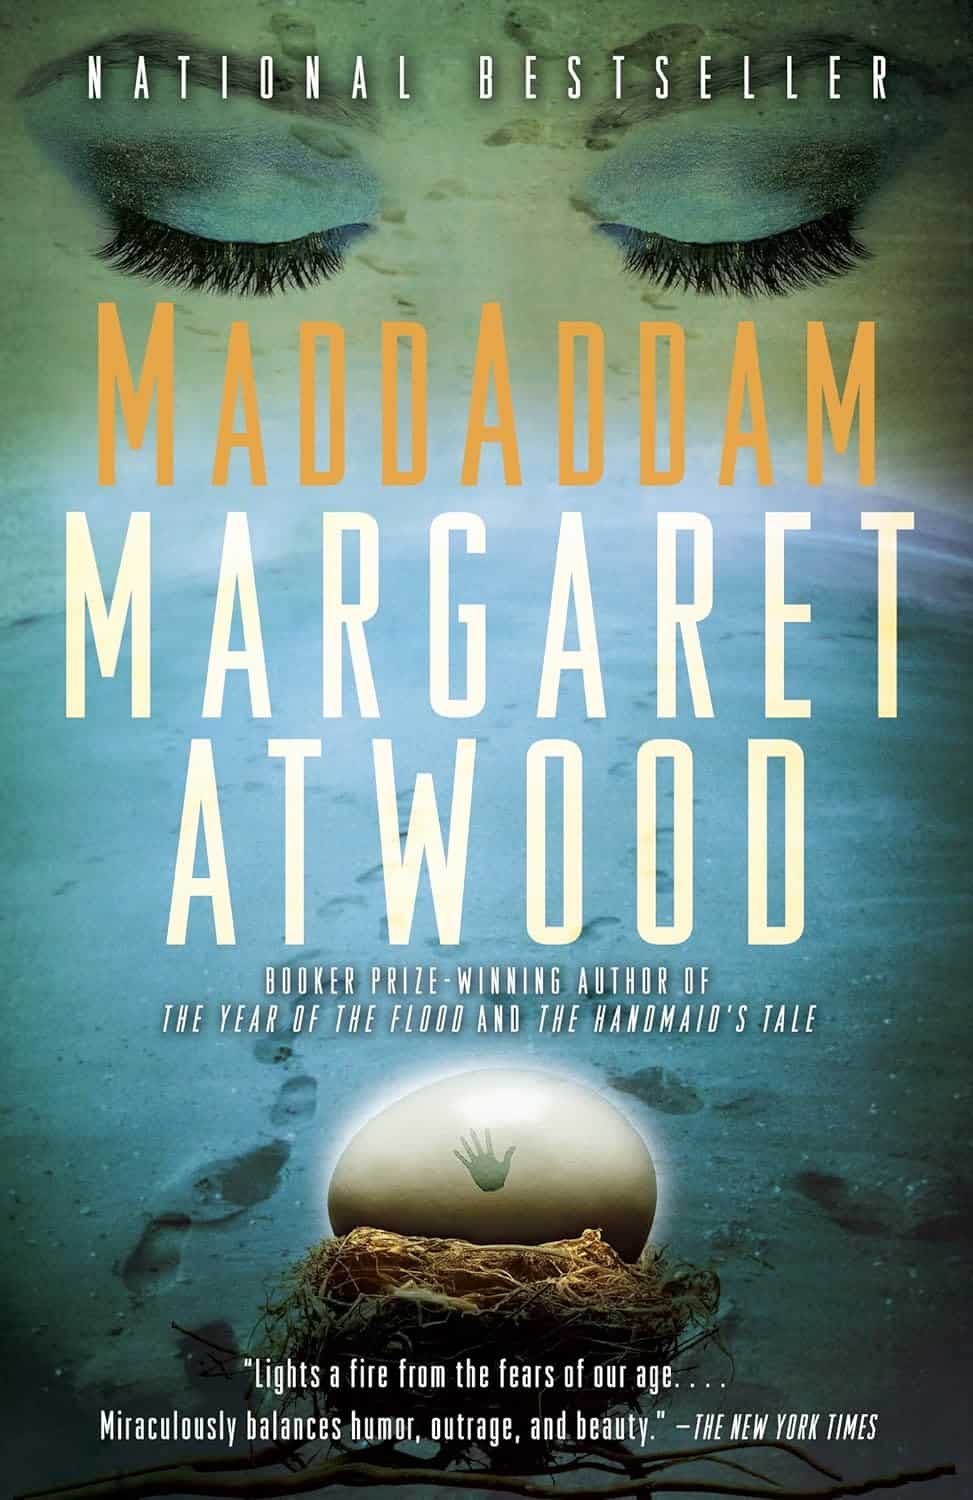 MaddAddam Trilogy by Margaret Atwood (2003)